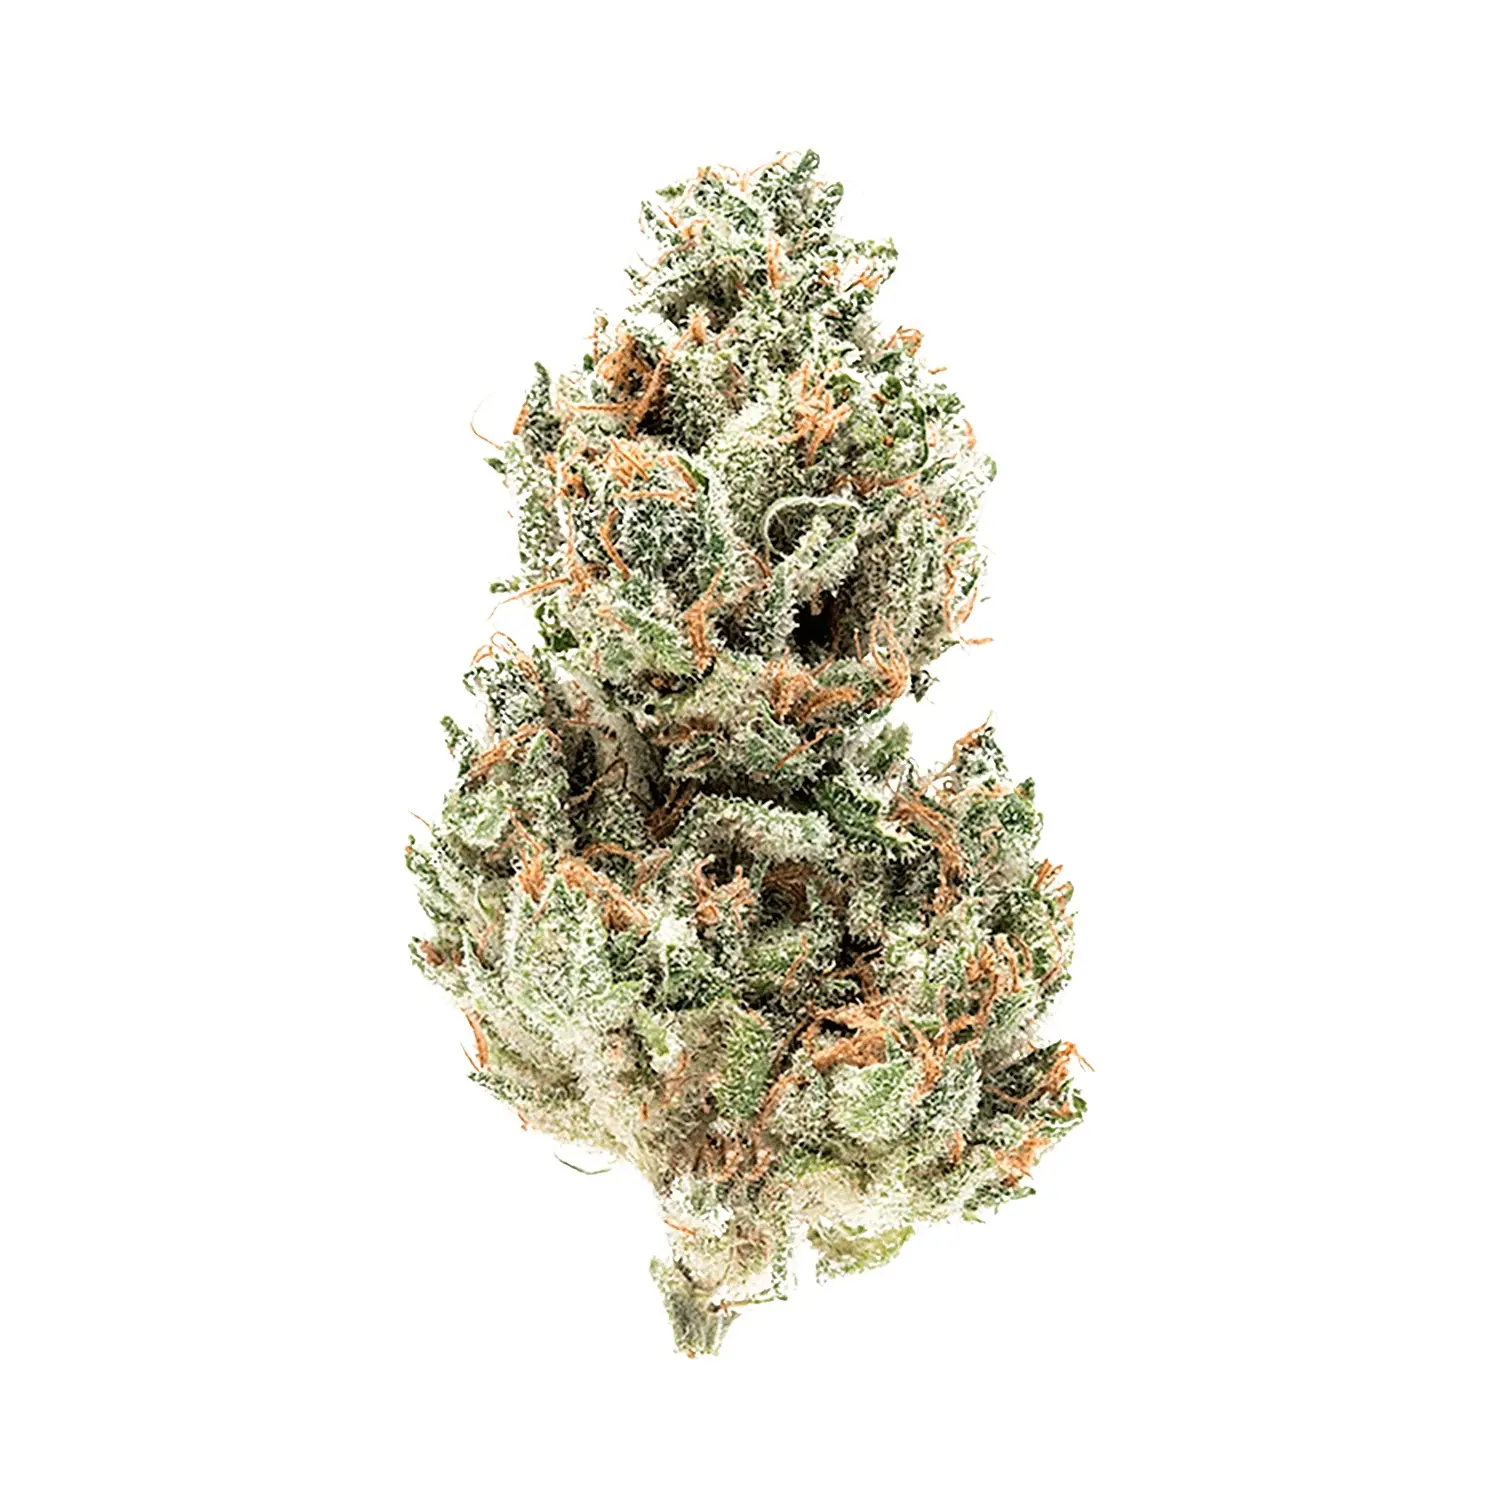 product preview image for Super Silver Haze